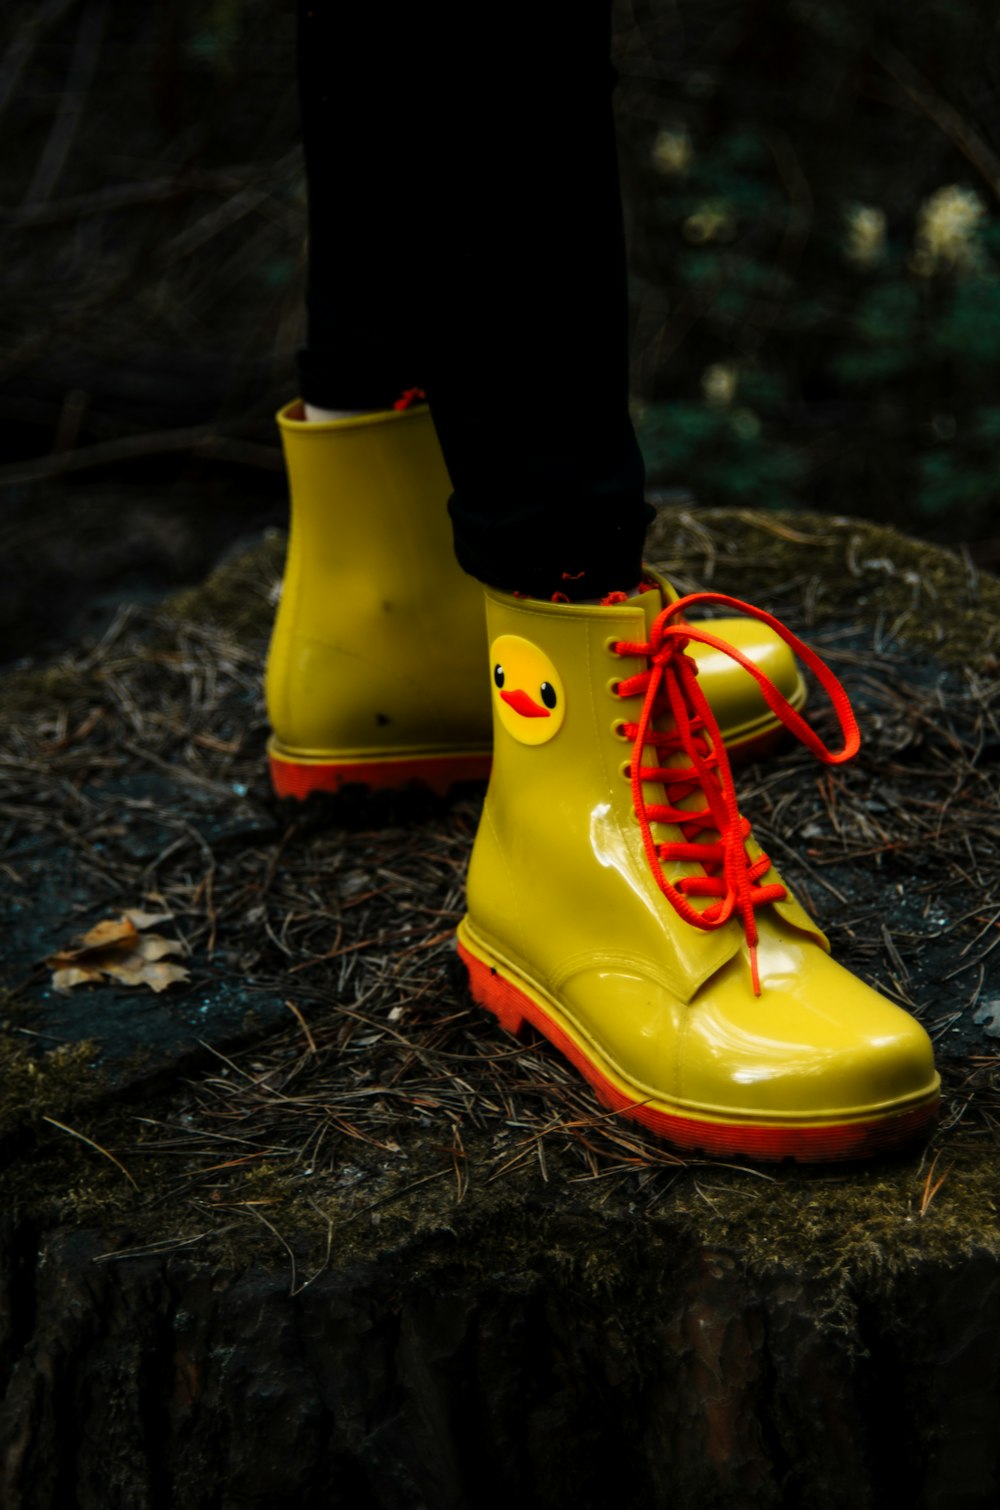 a person wearing yellow rain boots with red laces